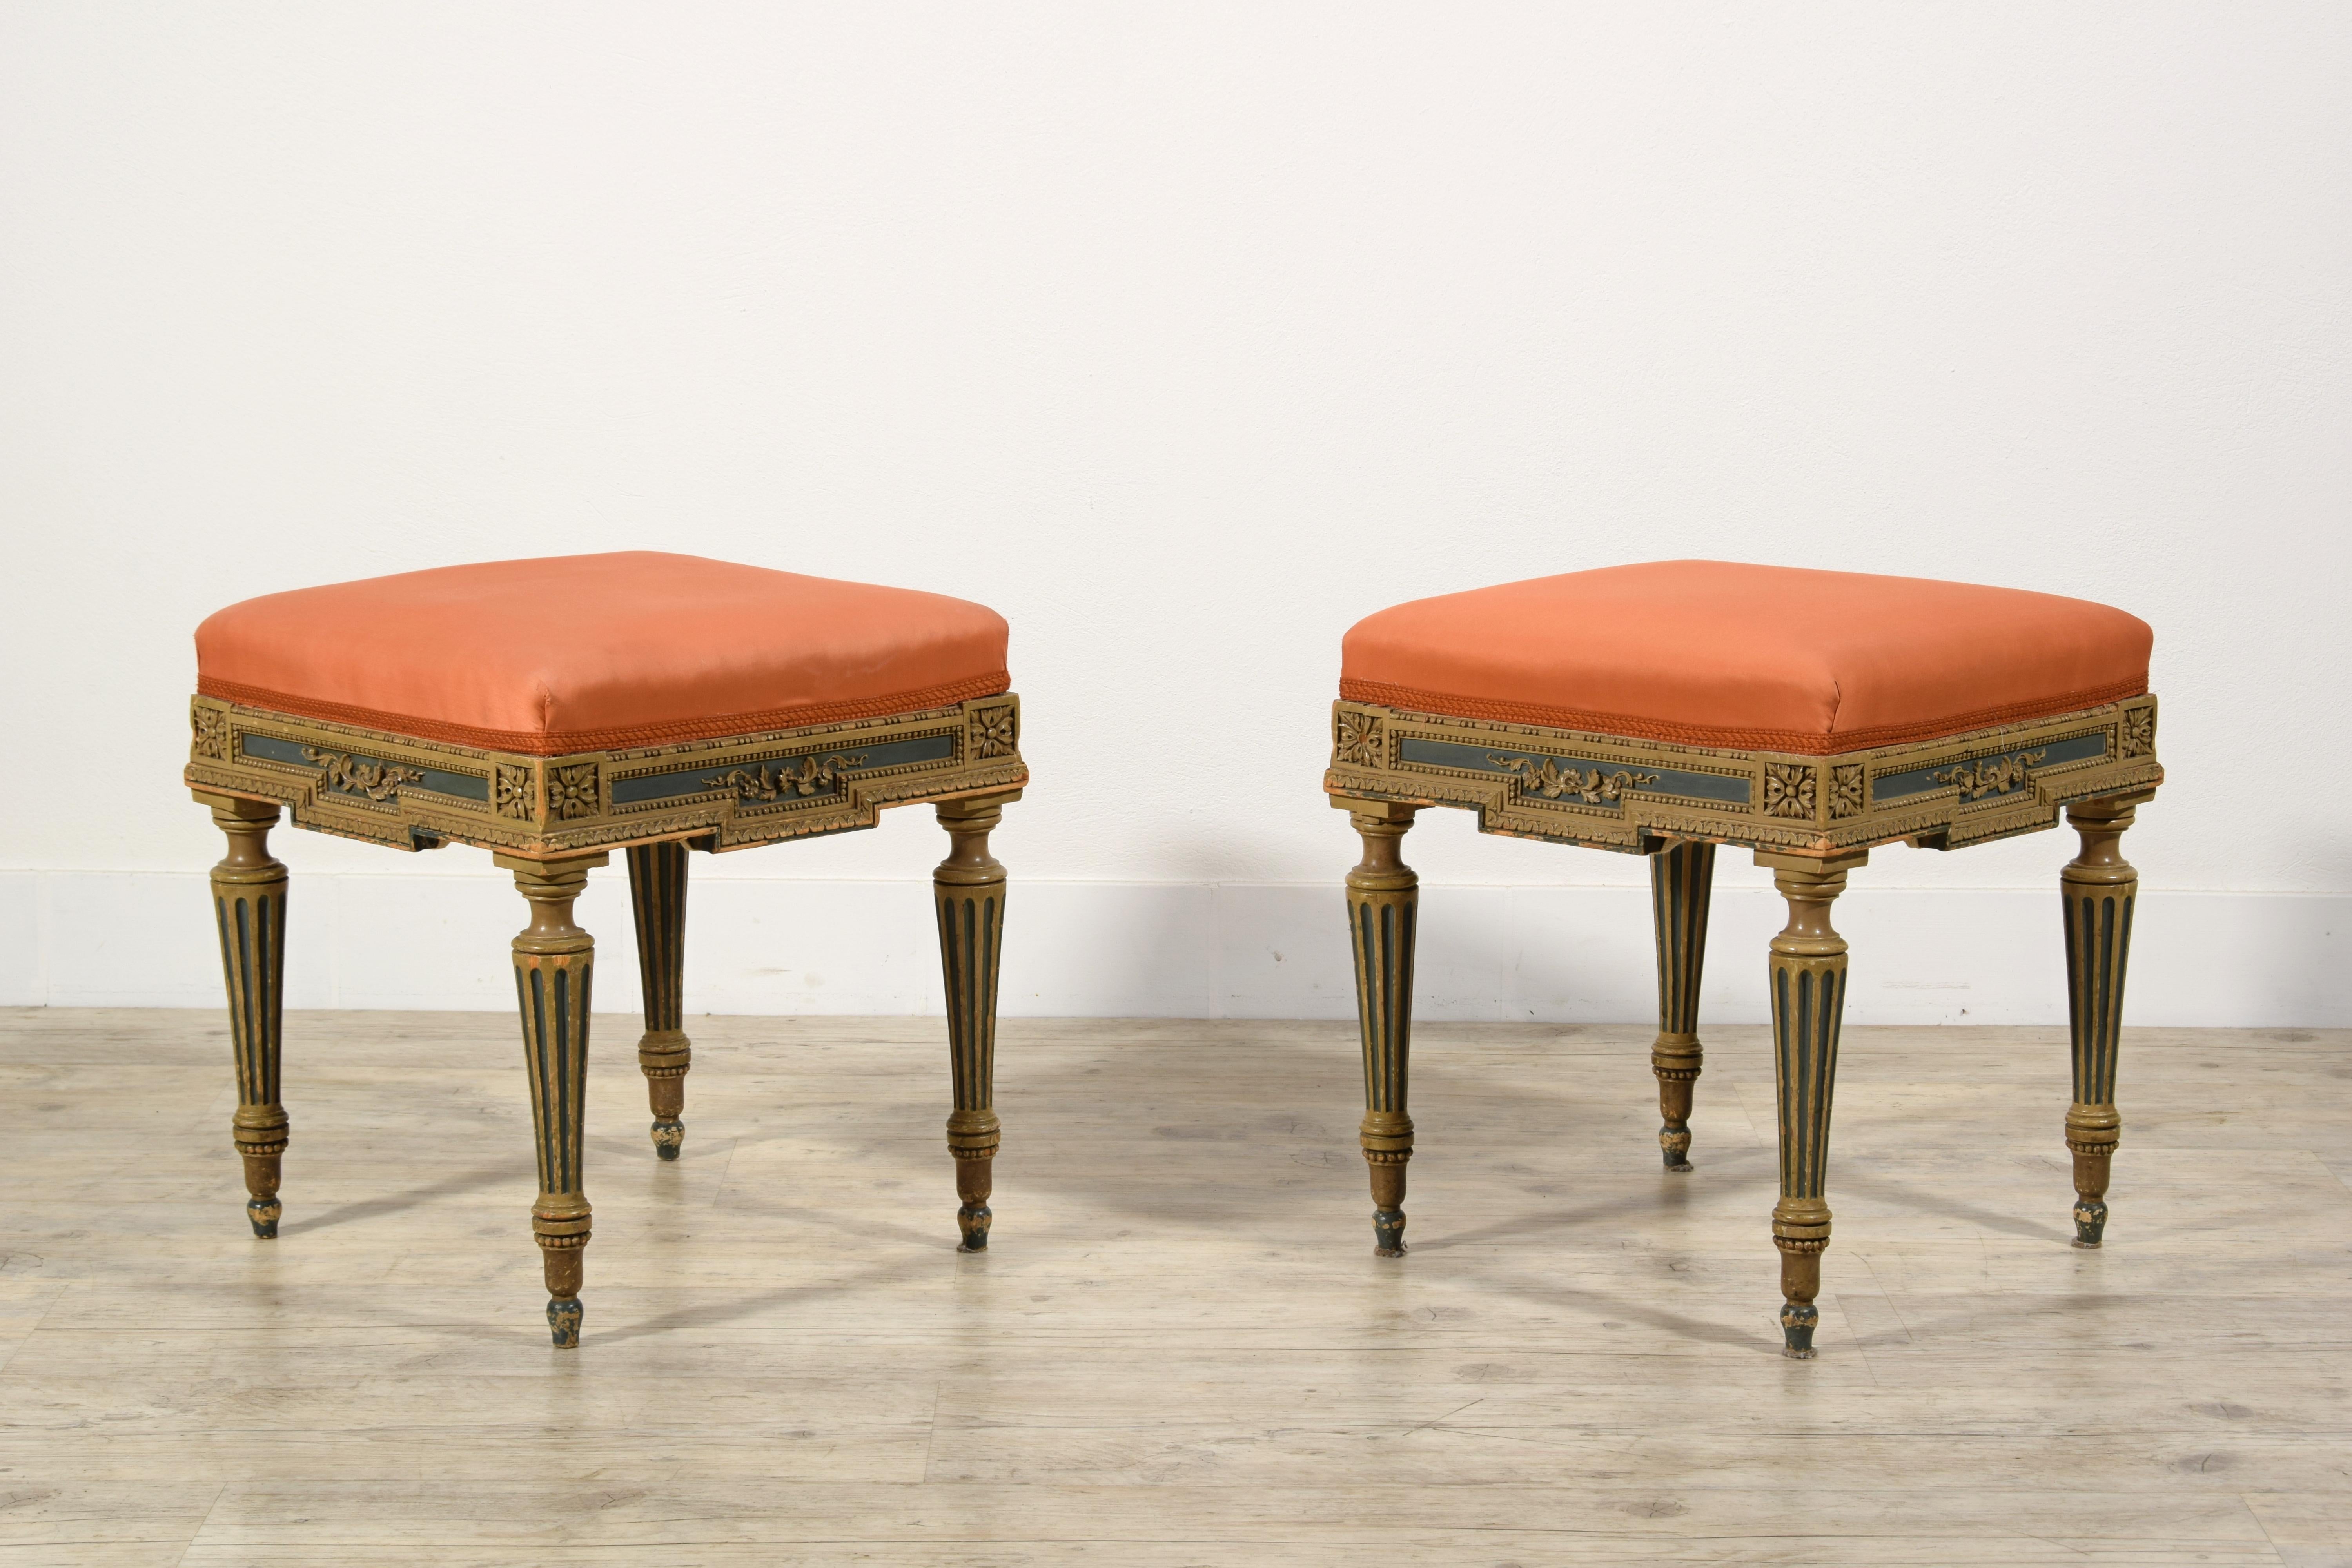 This gorgeous pair of stools was made in Piedmont (northern Italy) in the early twentieth century in Neoclassical style. Their structure is in carved wood and lacquered in shades of ochre and blue, characteristic of the construction area.
The band